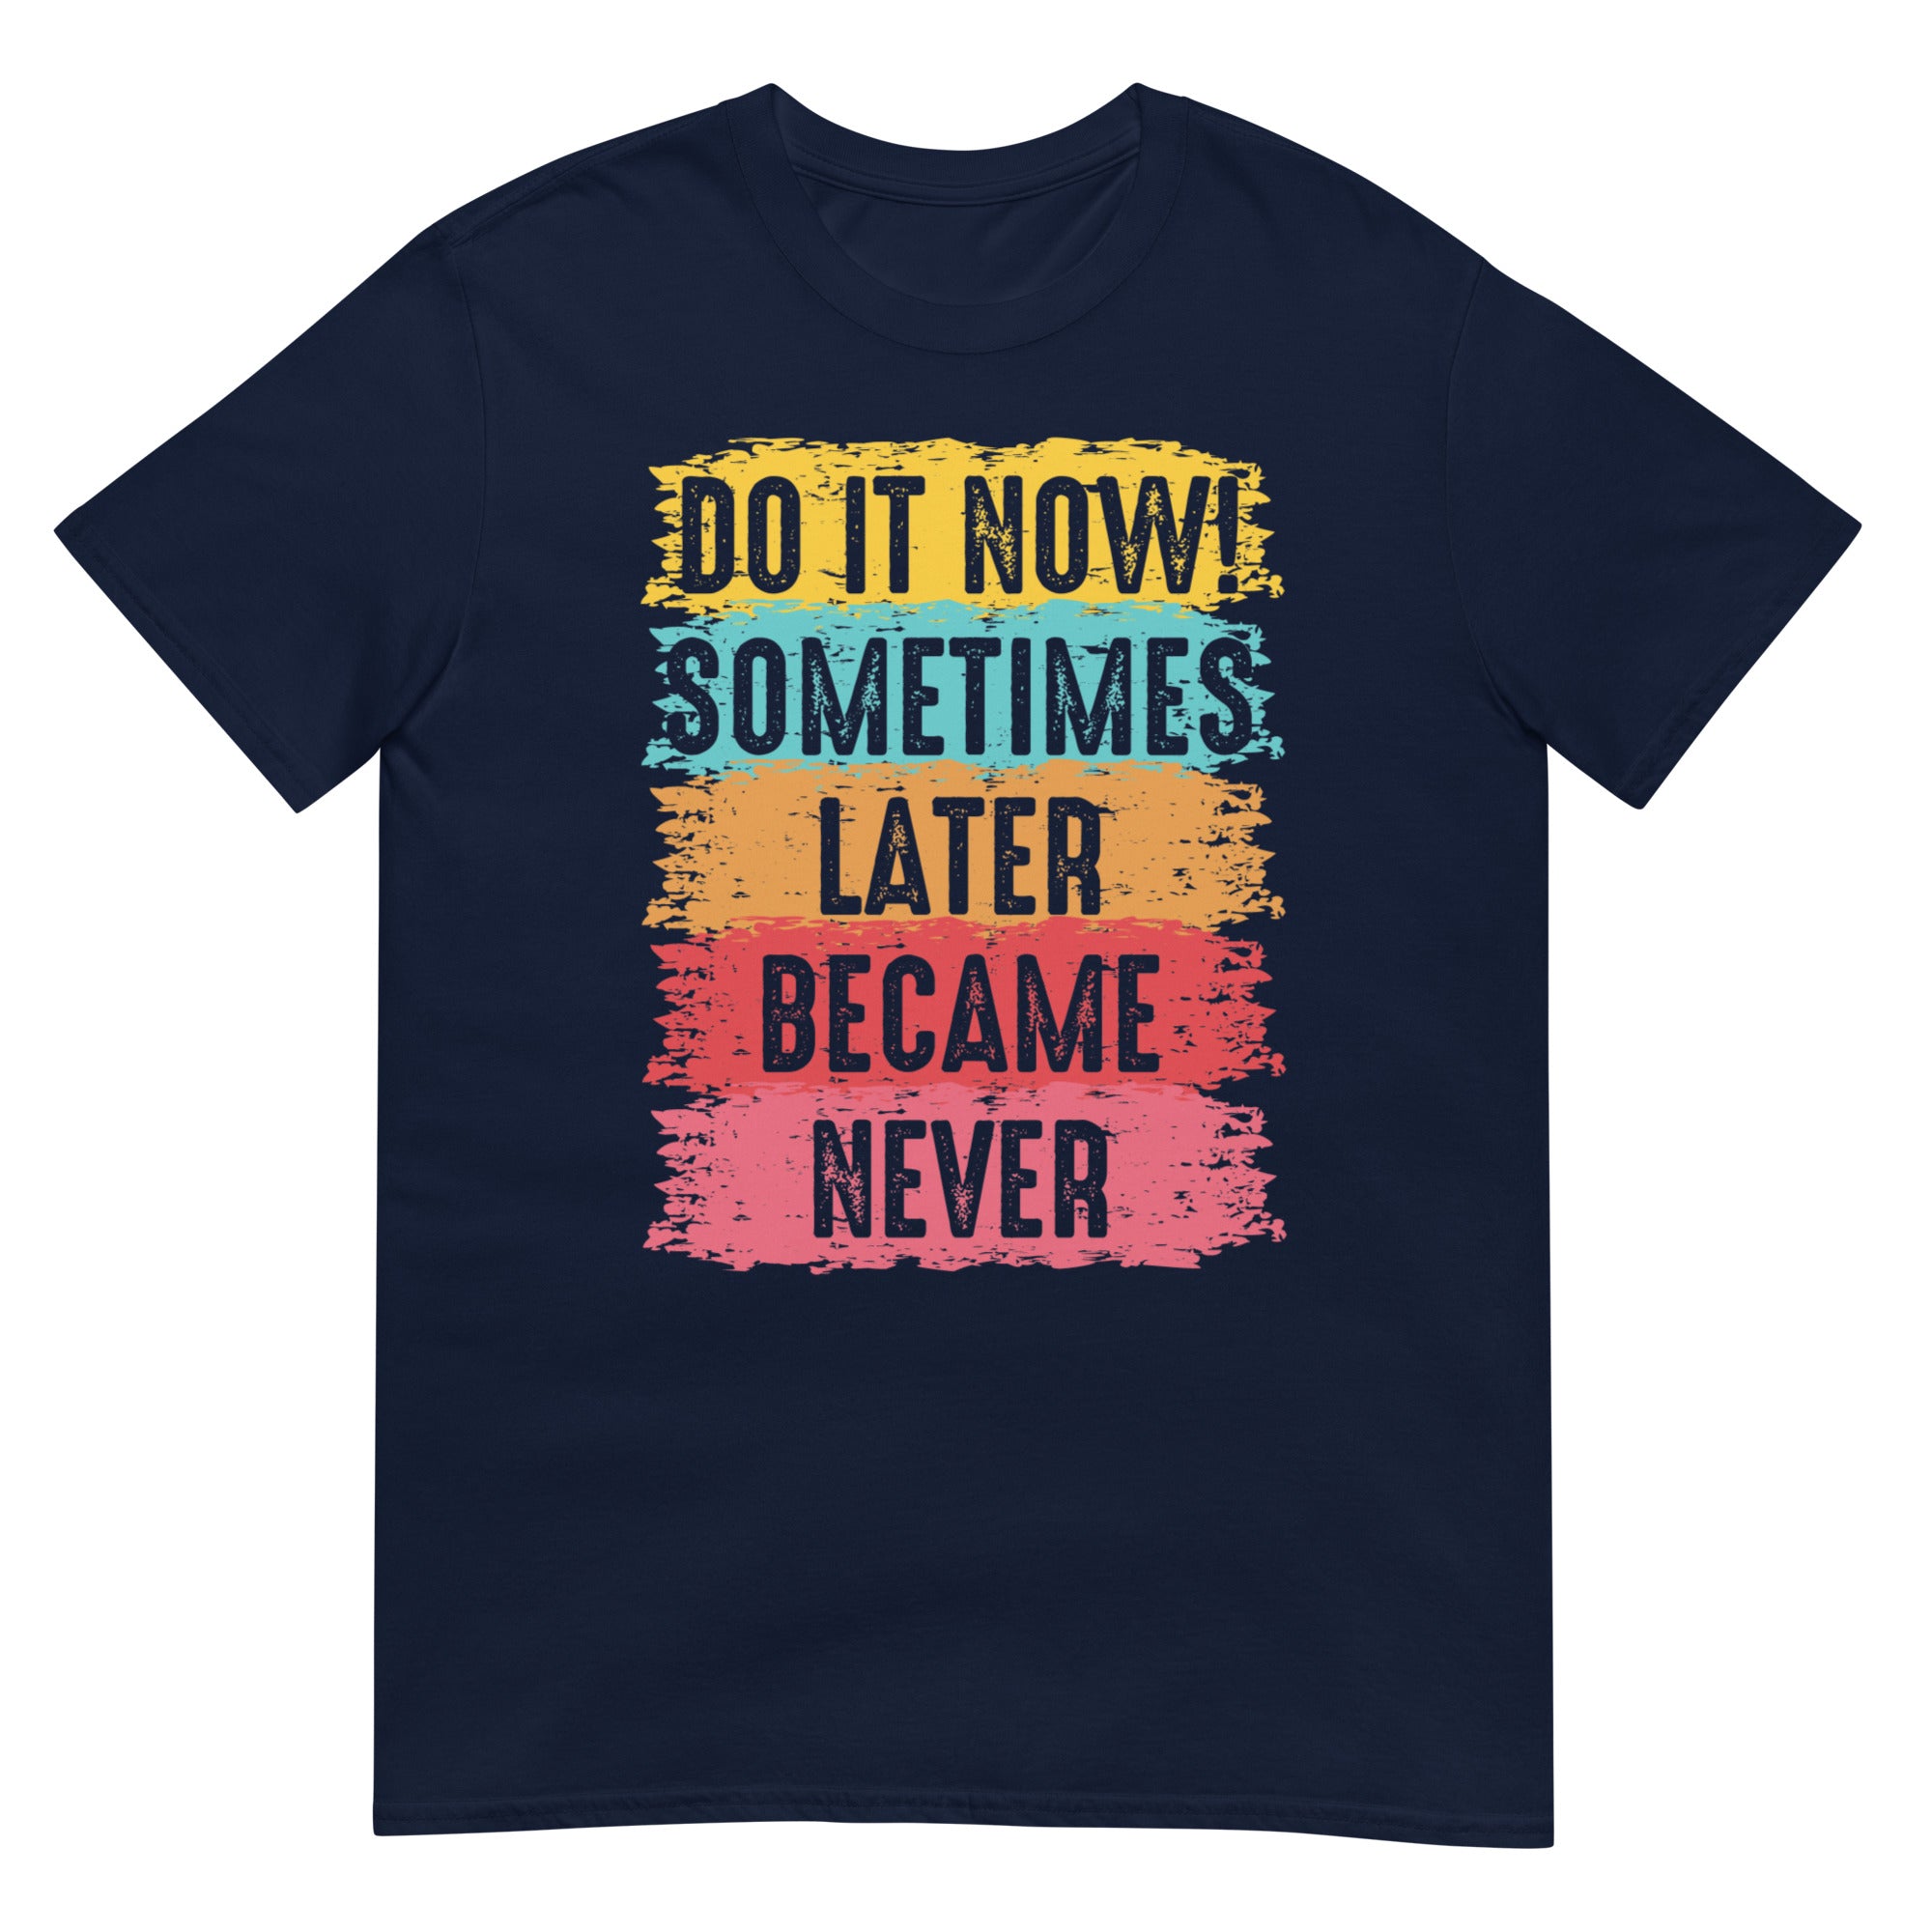 Do It Now, Sometimes Later Becomes Never - Short-Sleeve Unisex T-Shirt